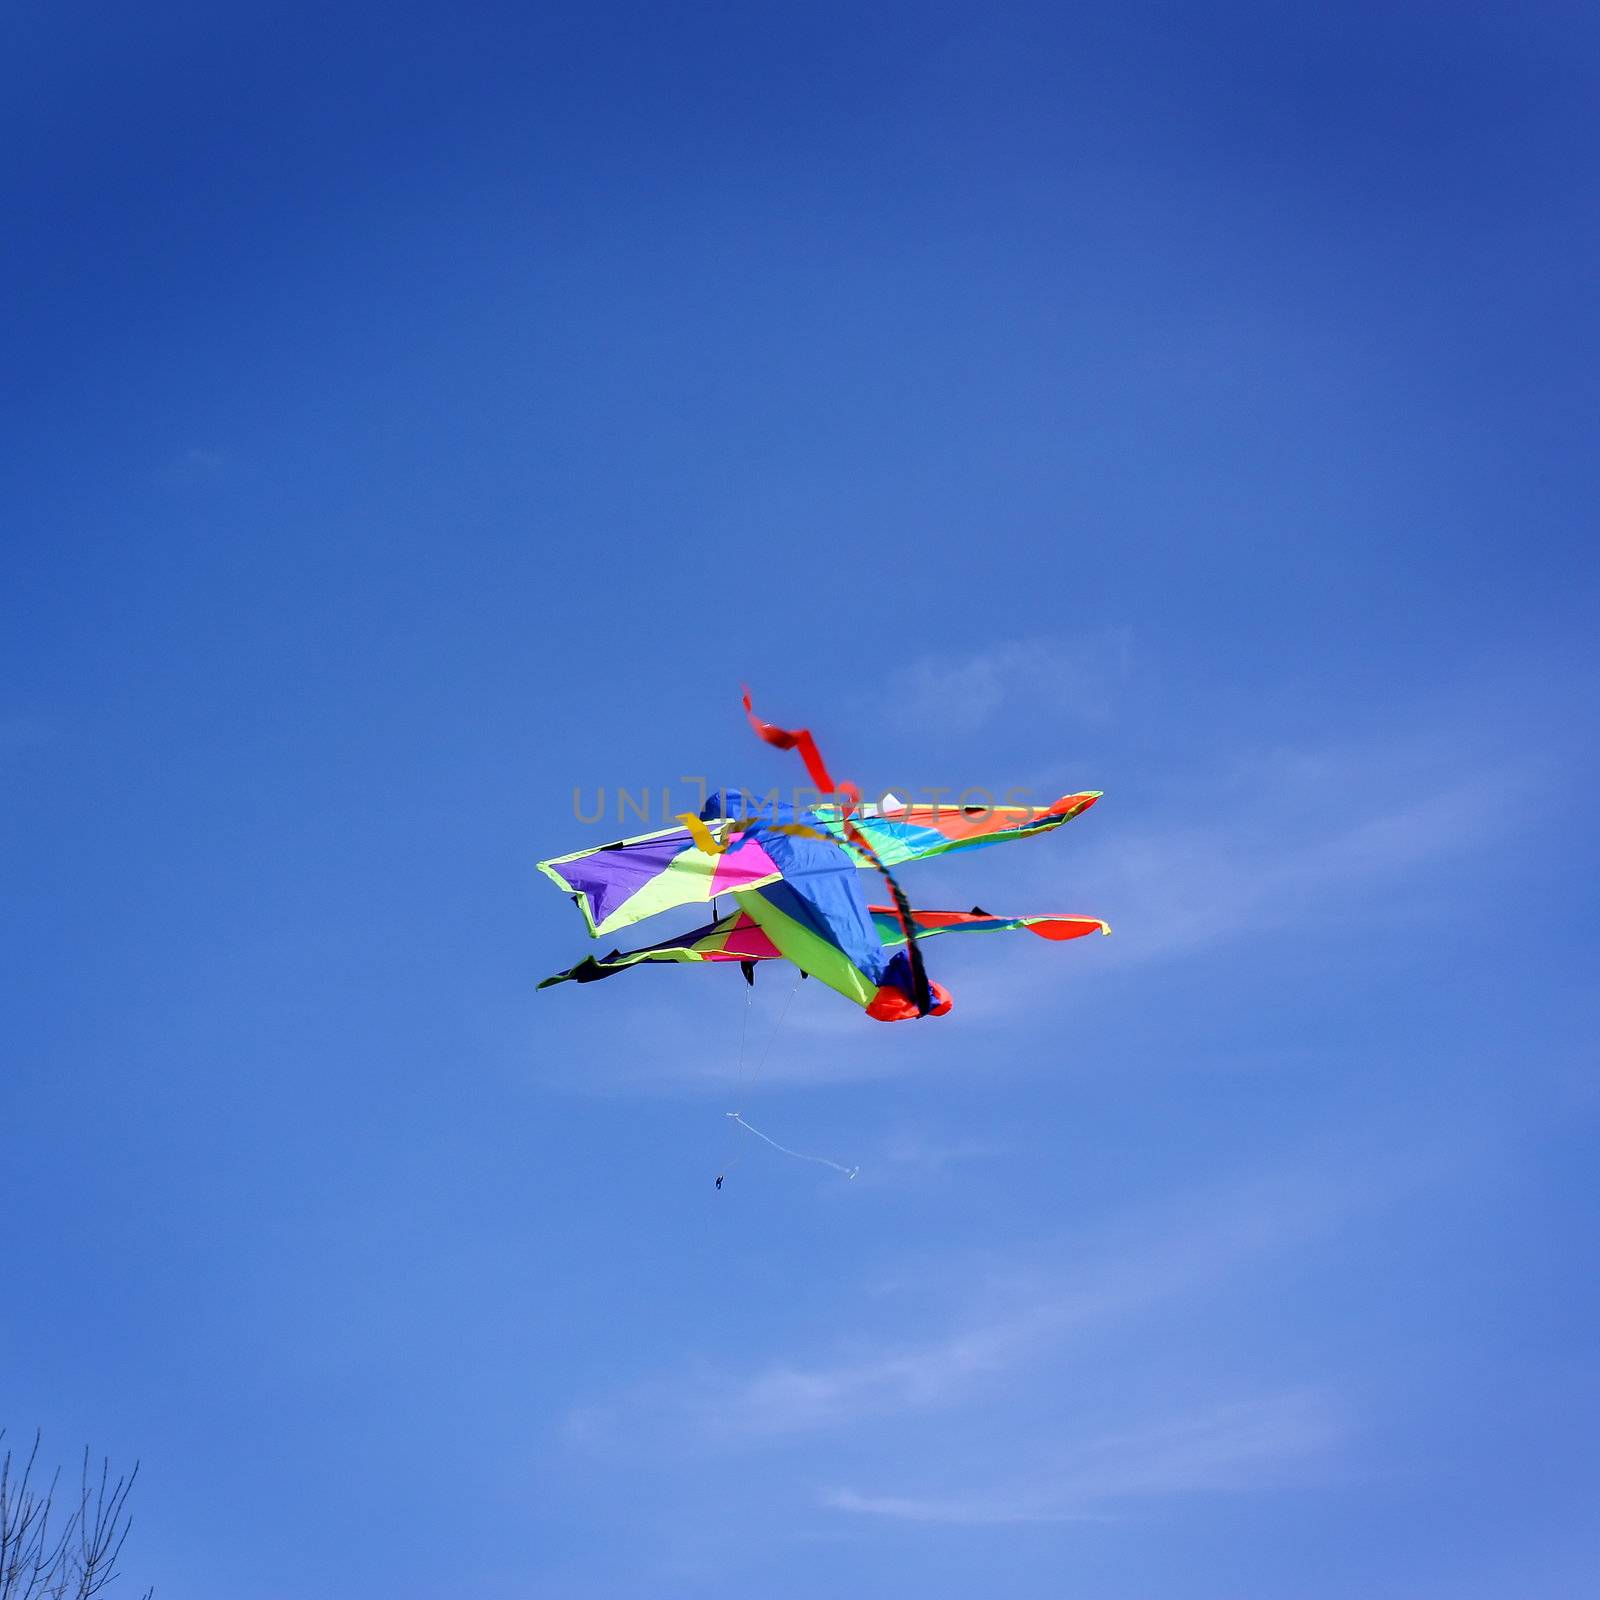 a colorful kite flies high in the sky